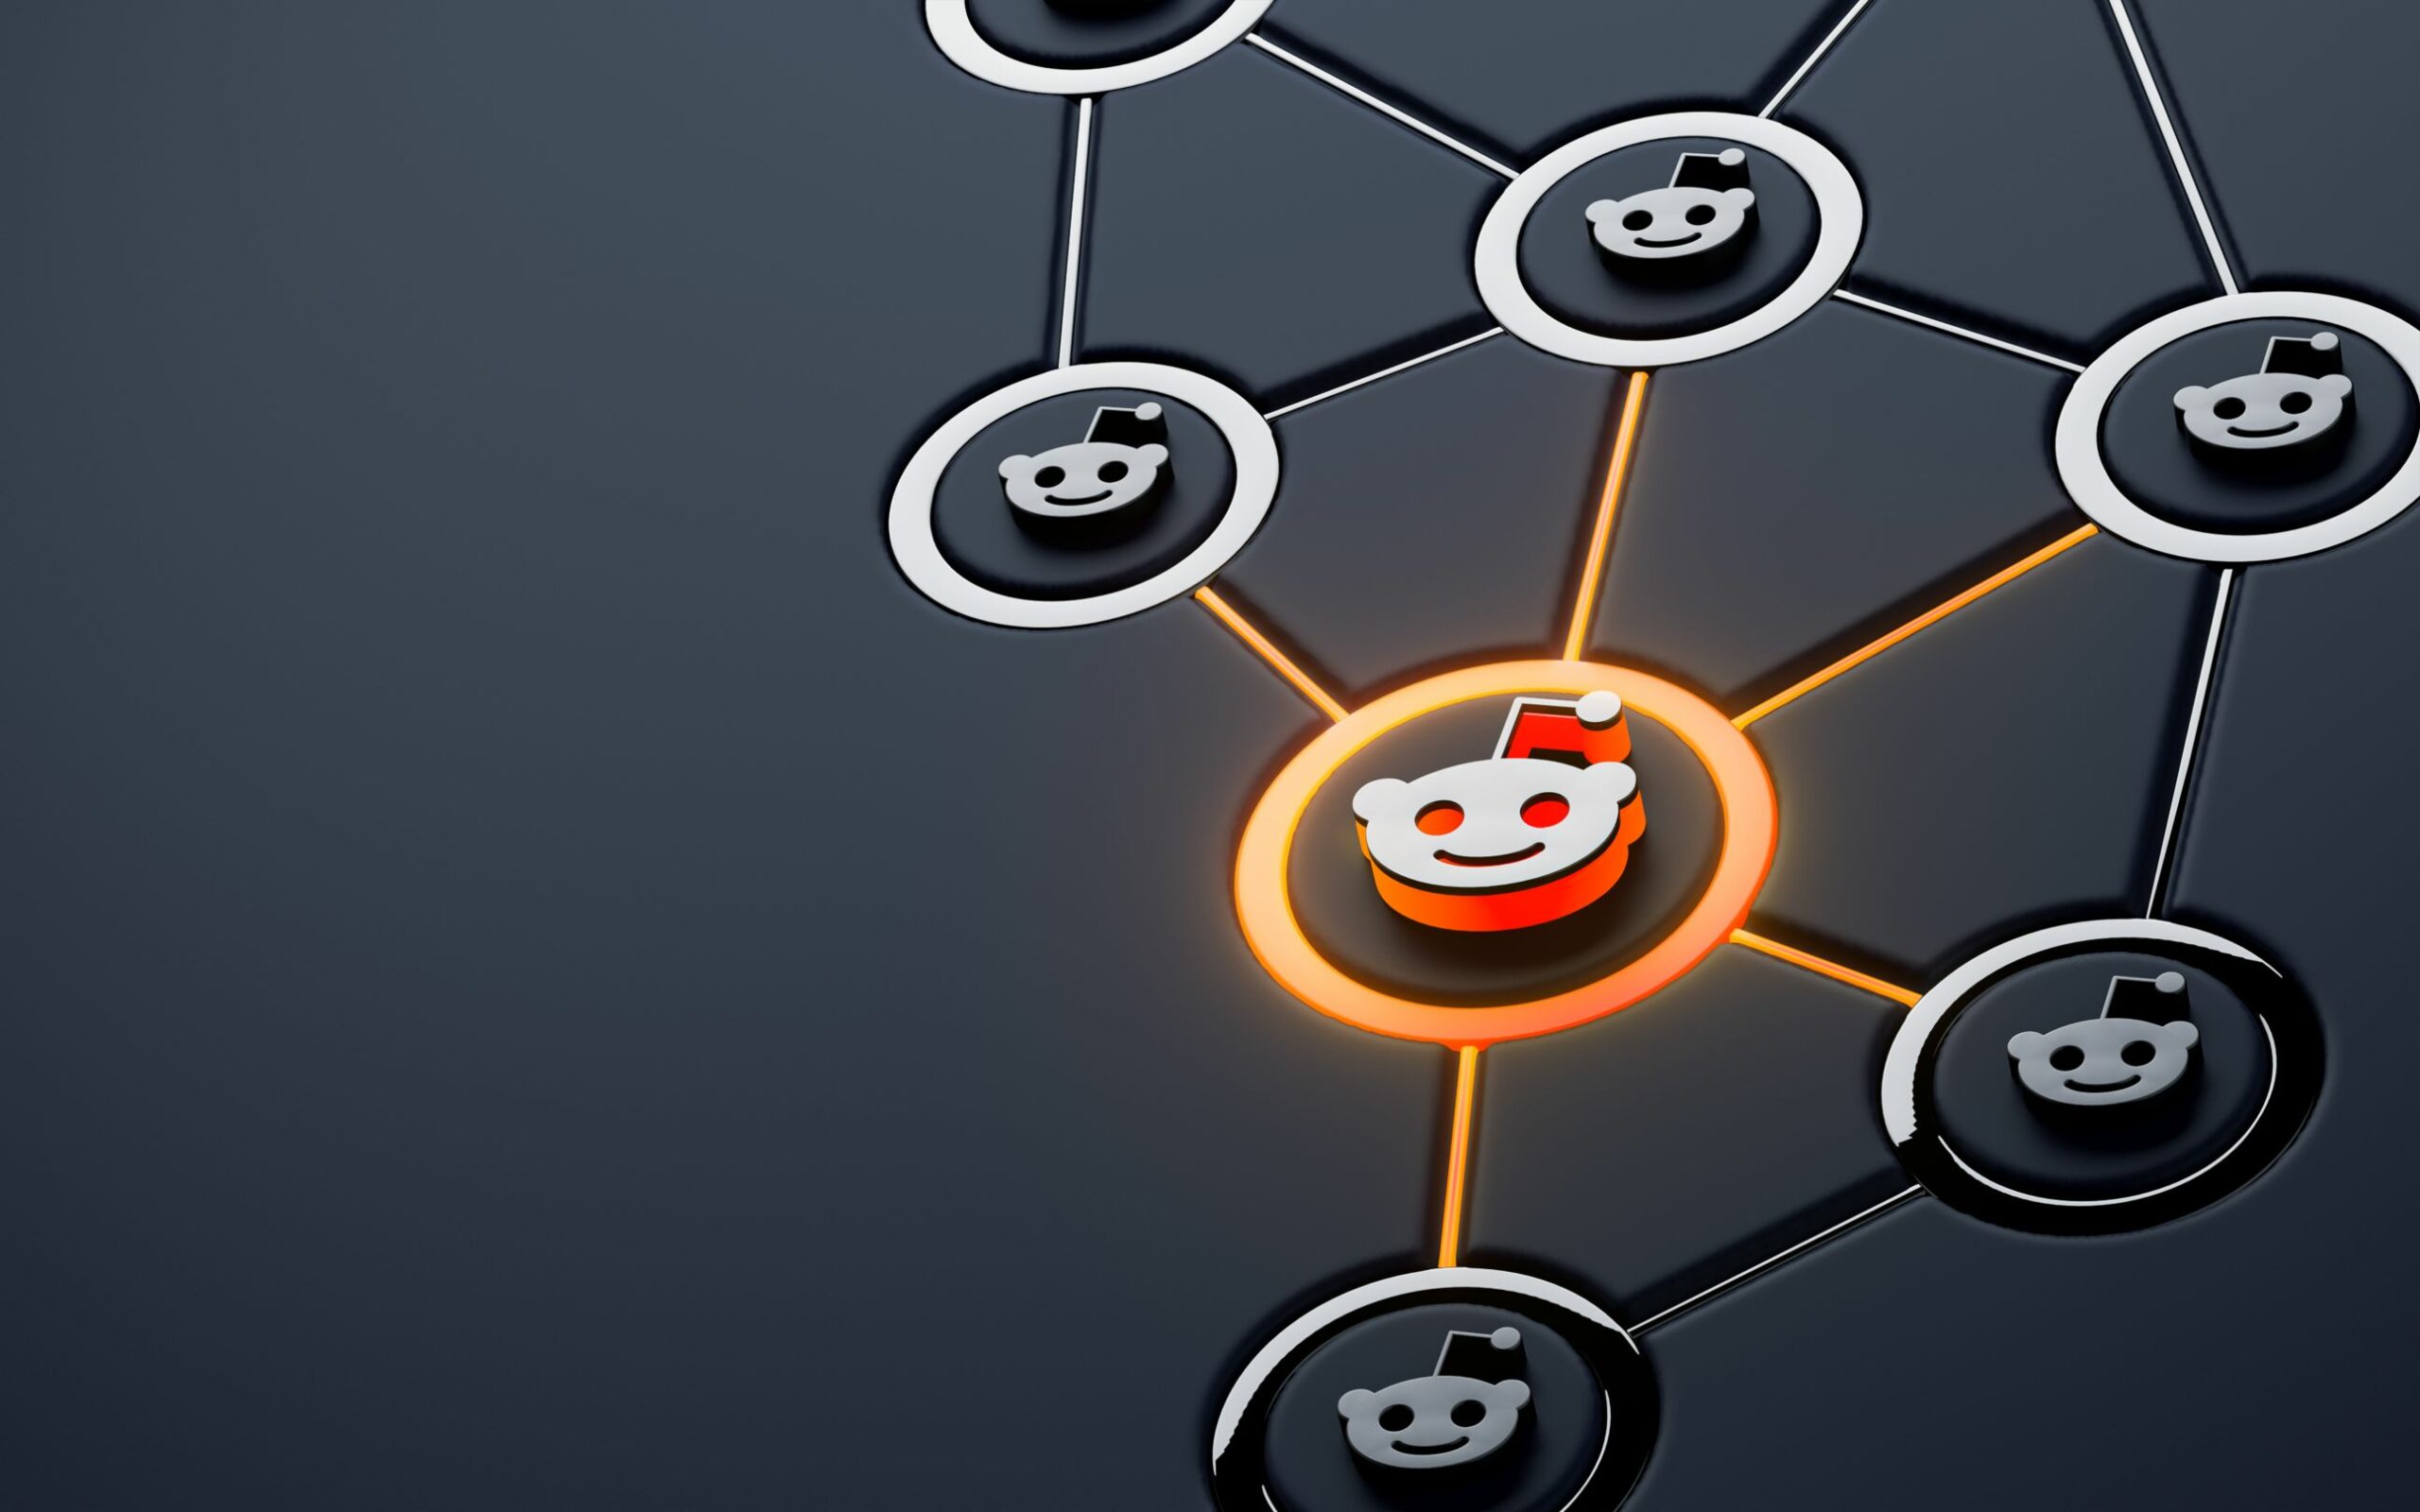 A glowing Reddit logo icon. Surrounded by non-glowing icons, all connected in the typical social networking style.